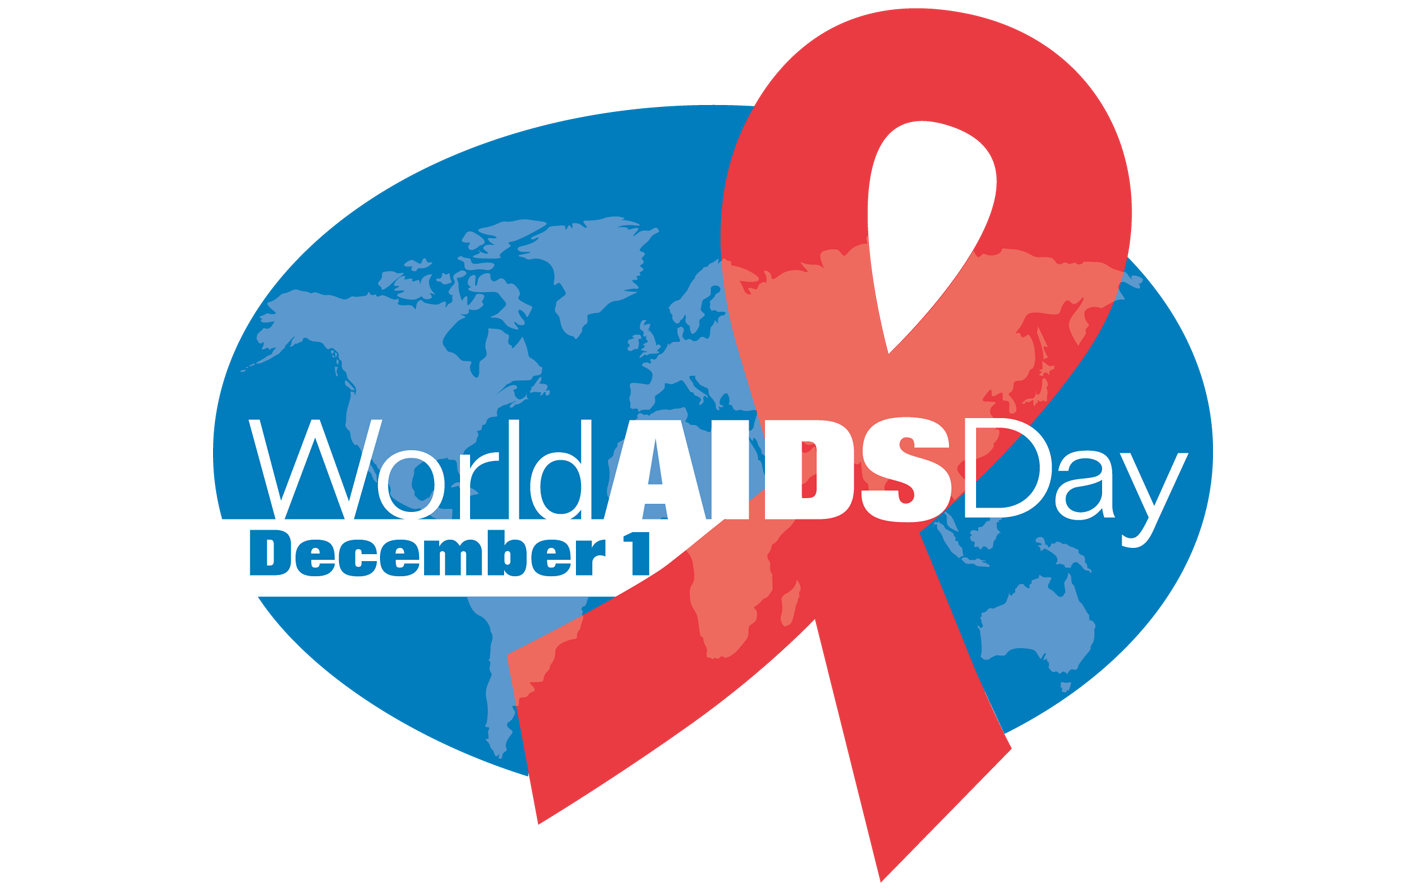 Cool Blue Quizlet Logo - Quizlet of the Week: World AIDS Day | Quizlet